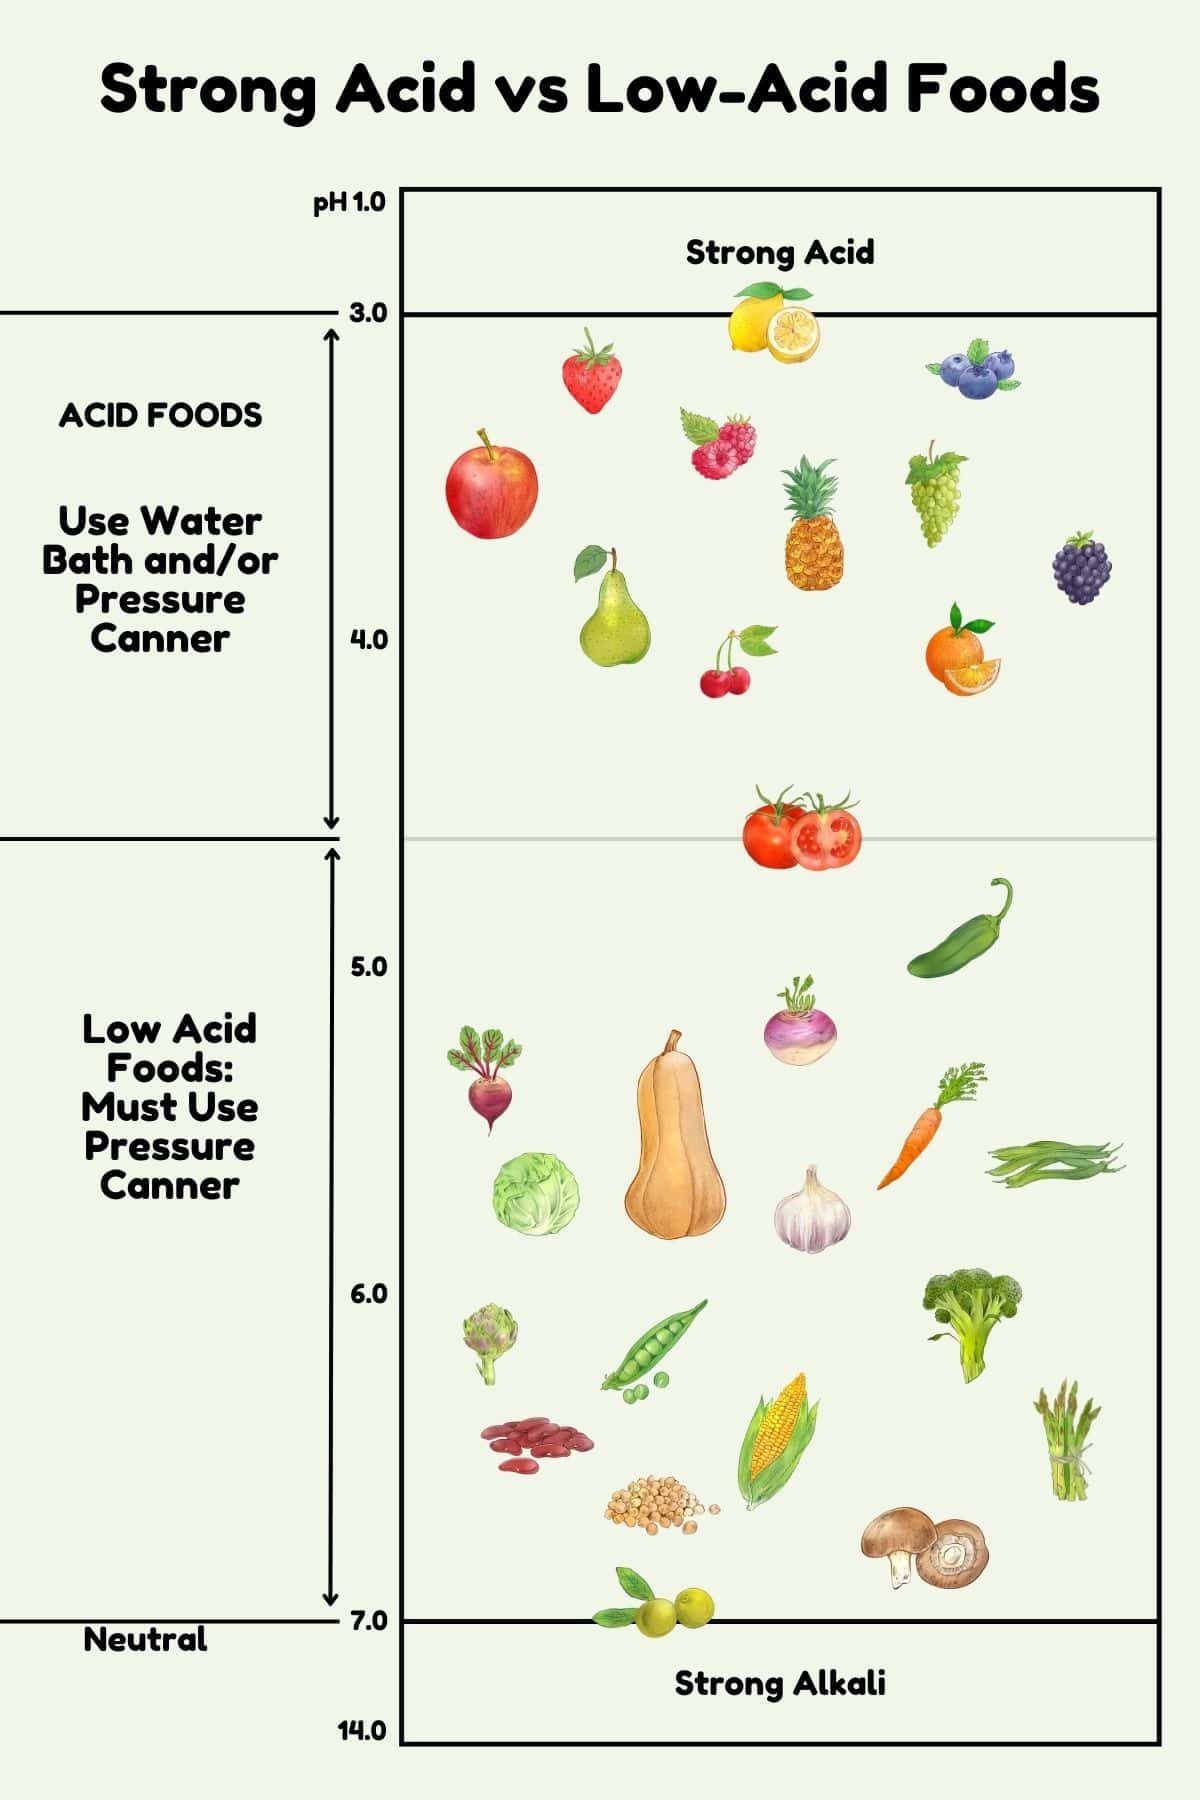 A chart of strong acid vs low-acid foods